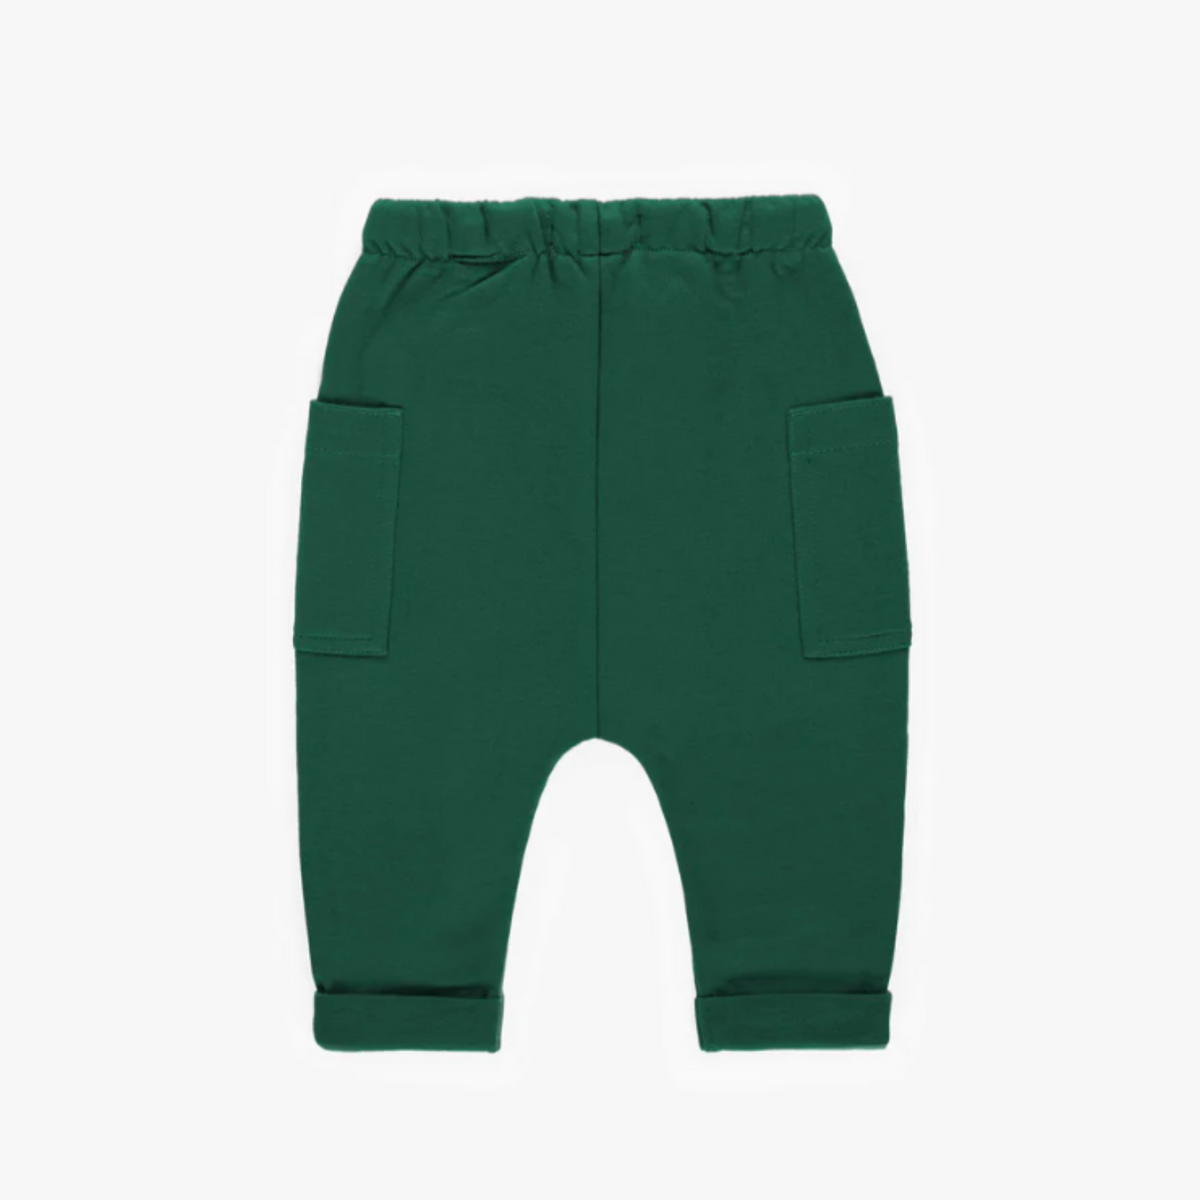 Green Casual Fit Pants in Cotton, Baby